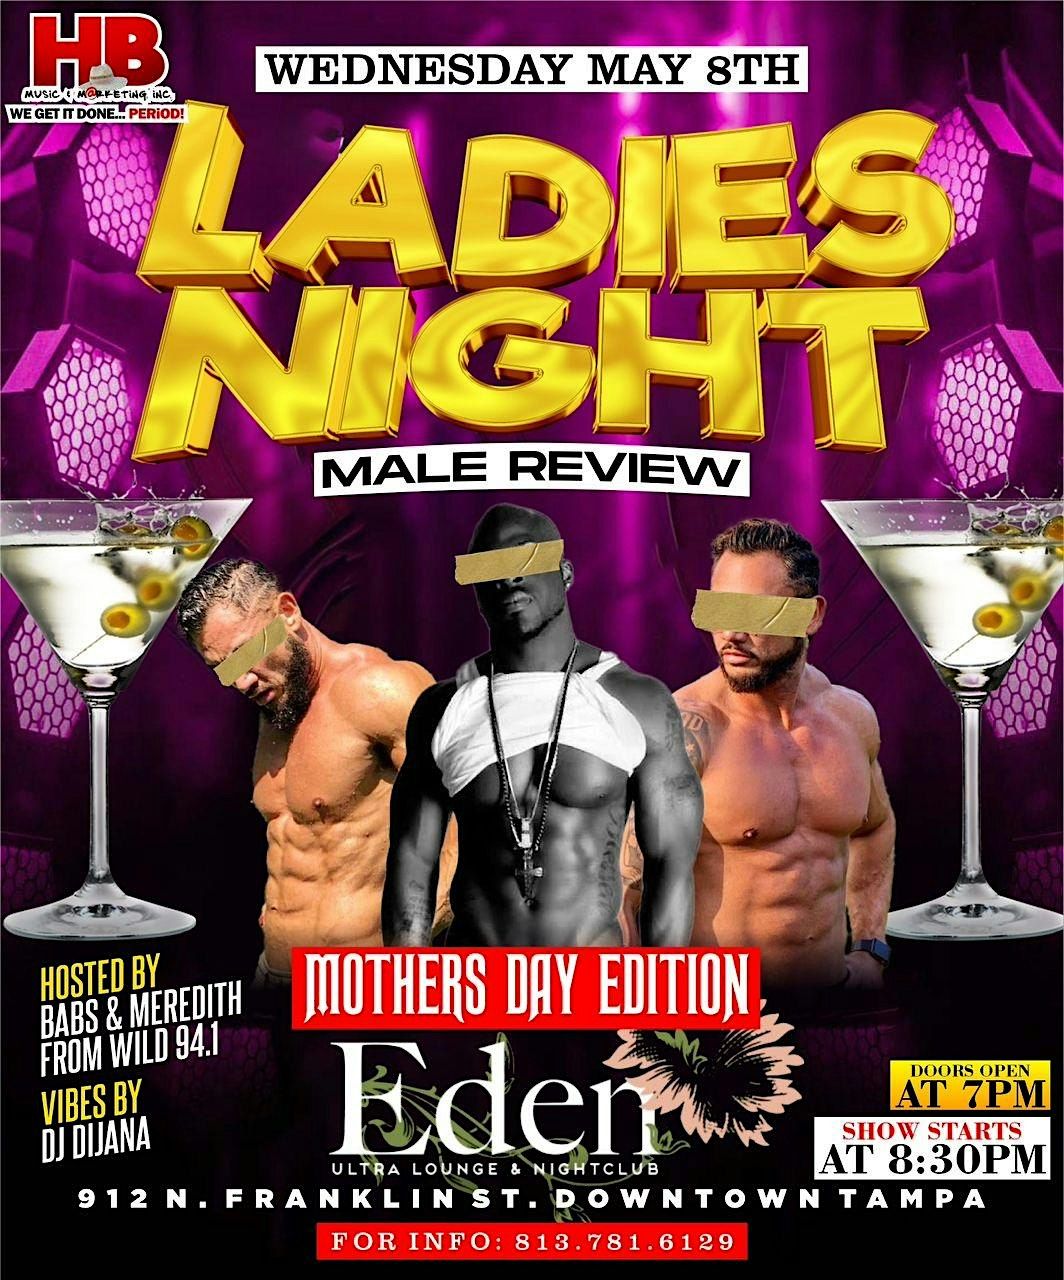 Ladies Night Male Review "Mother's Day Edition"